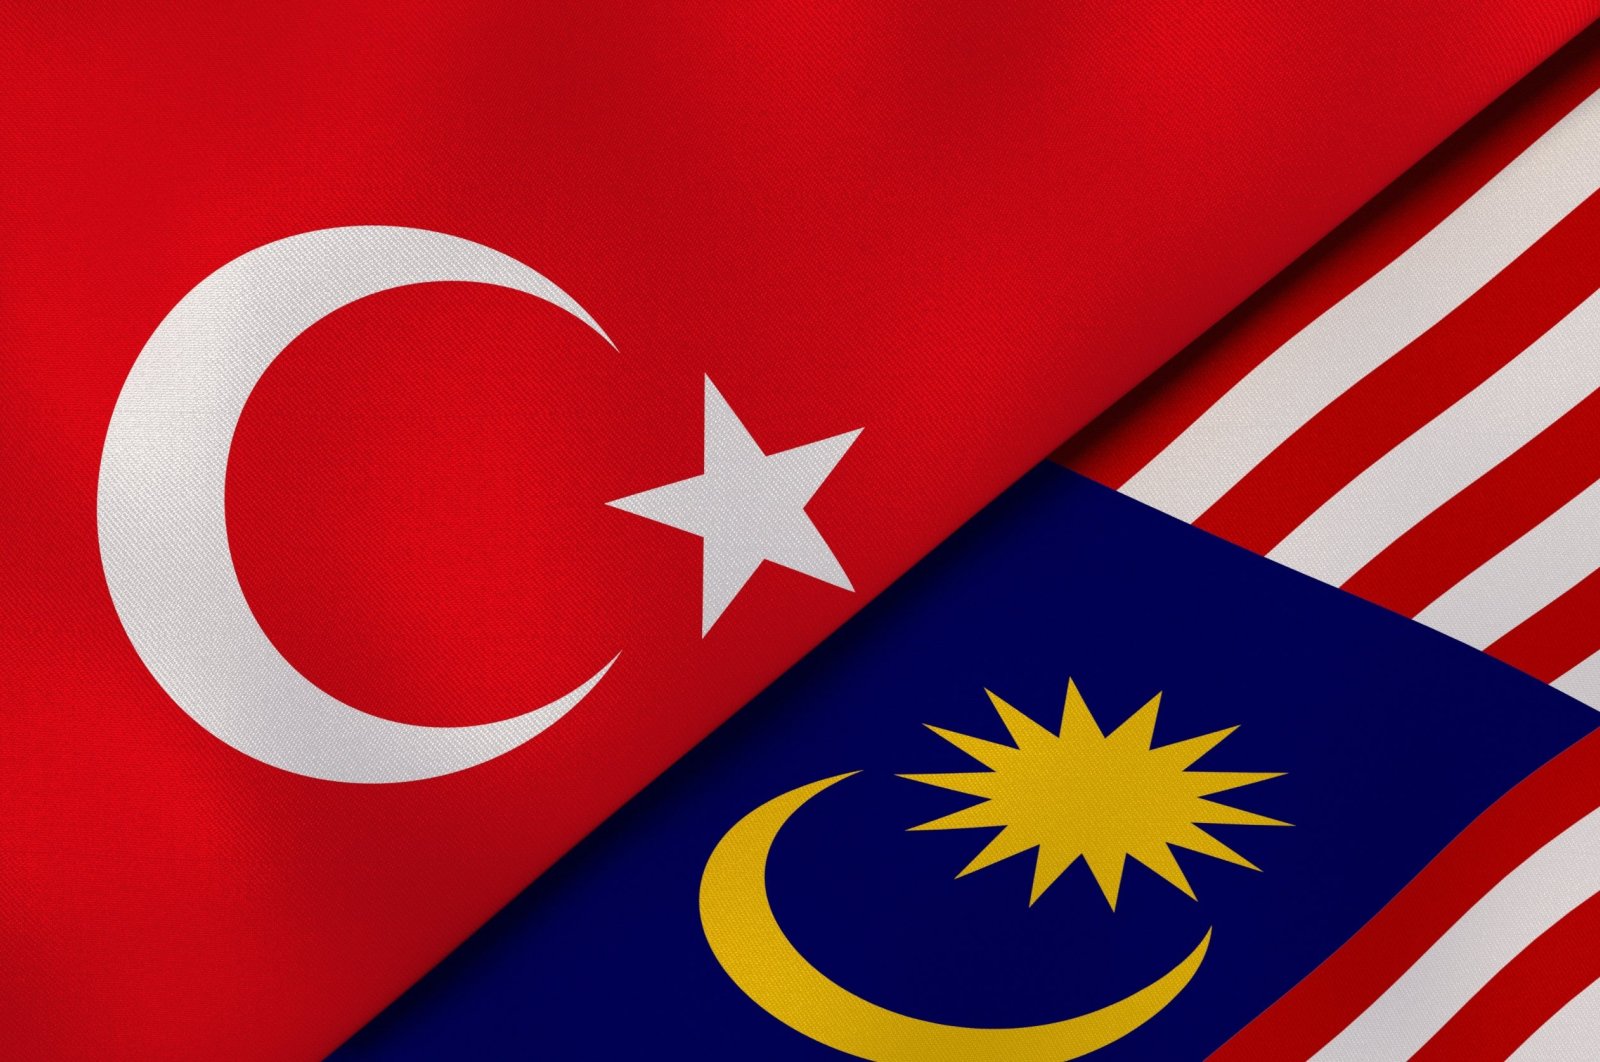 Türkiye and Malaysia rely on non-oil resources and technology, growing gradually with developed middle classes, and have established critical infrastructures from academics to the defense industry. (Shutterstock Photo)